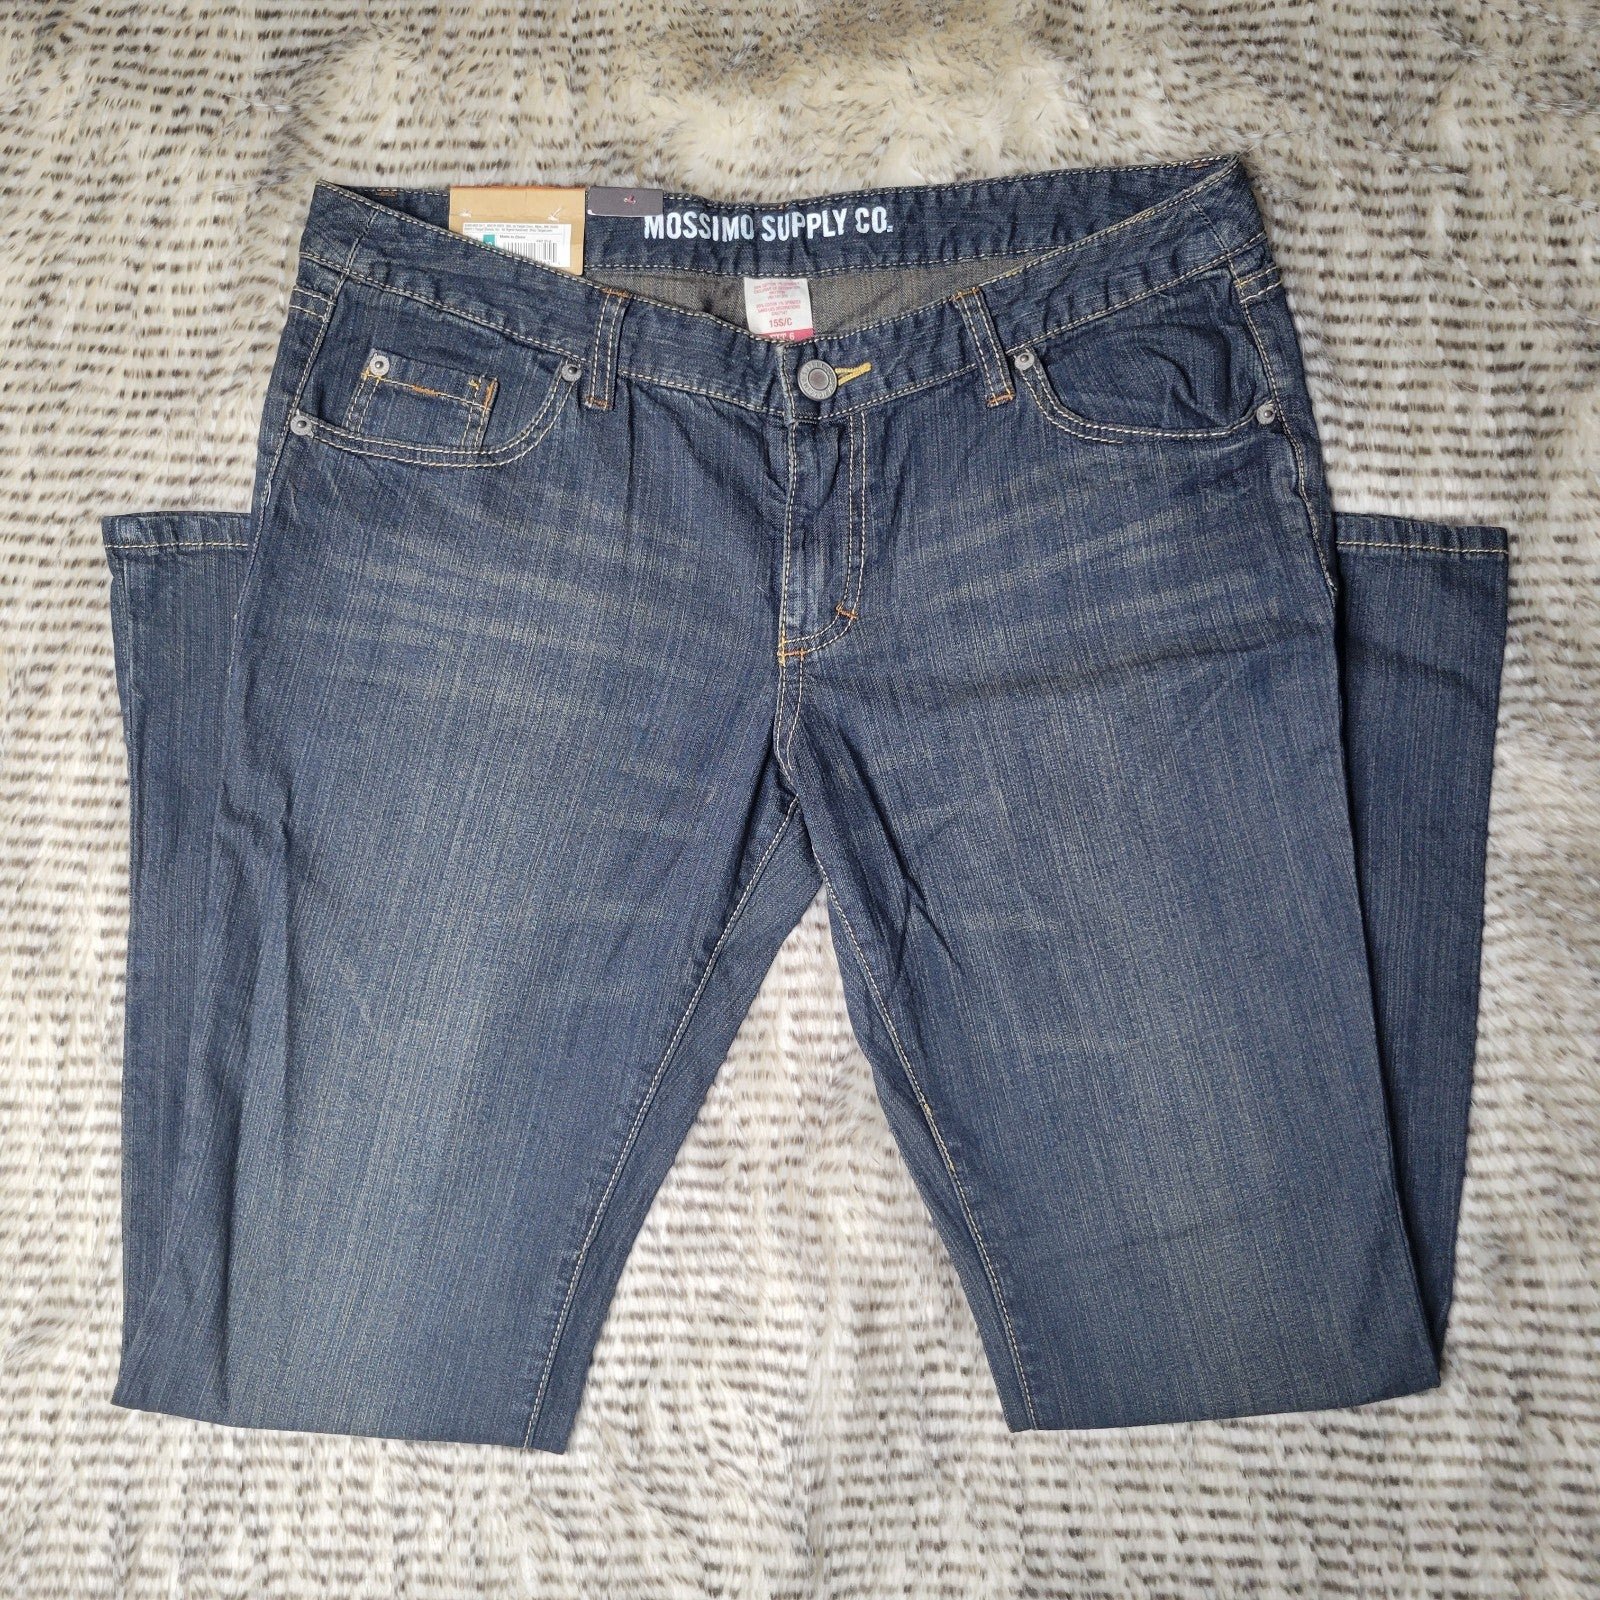 Buy Mossimo Supply Co. Bootcut jeans size 15S LG4KV2CjQ no tax